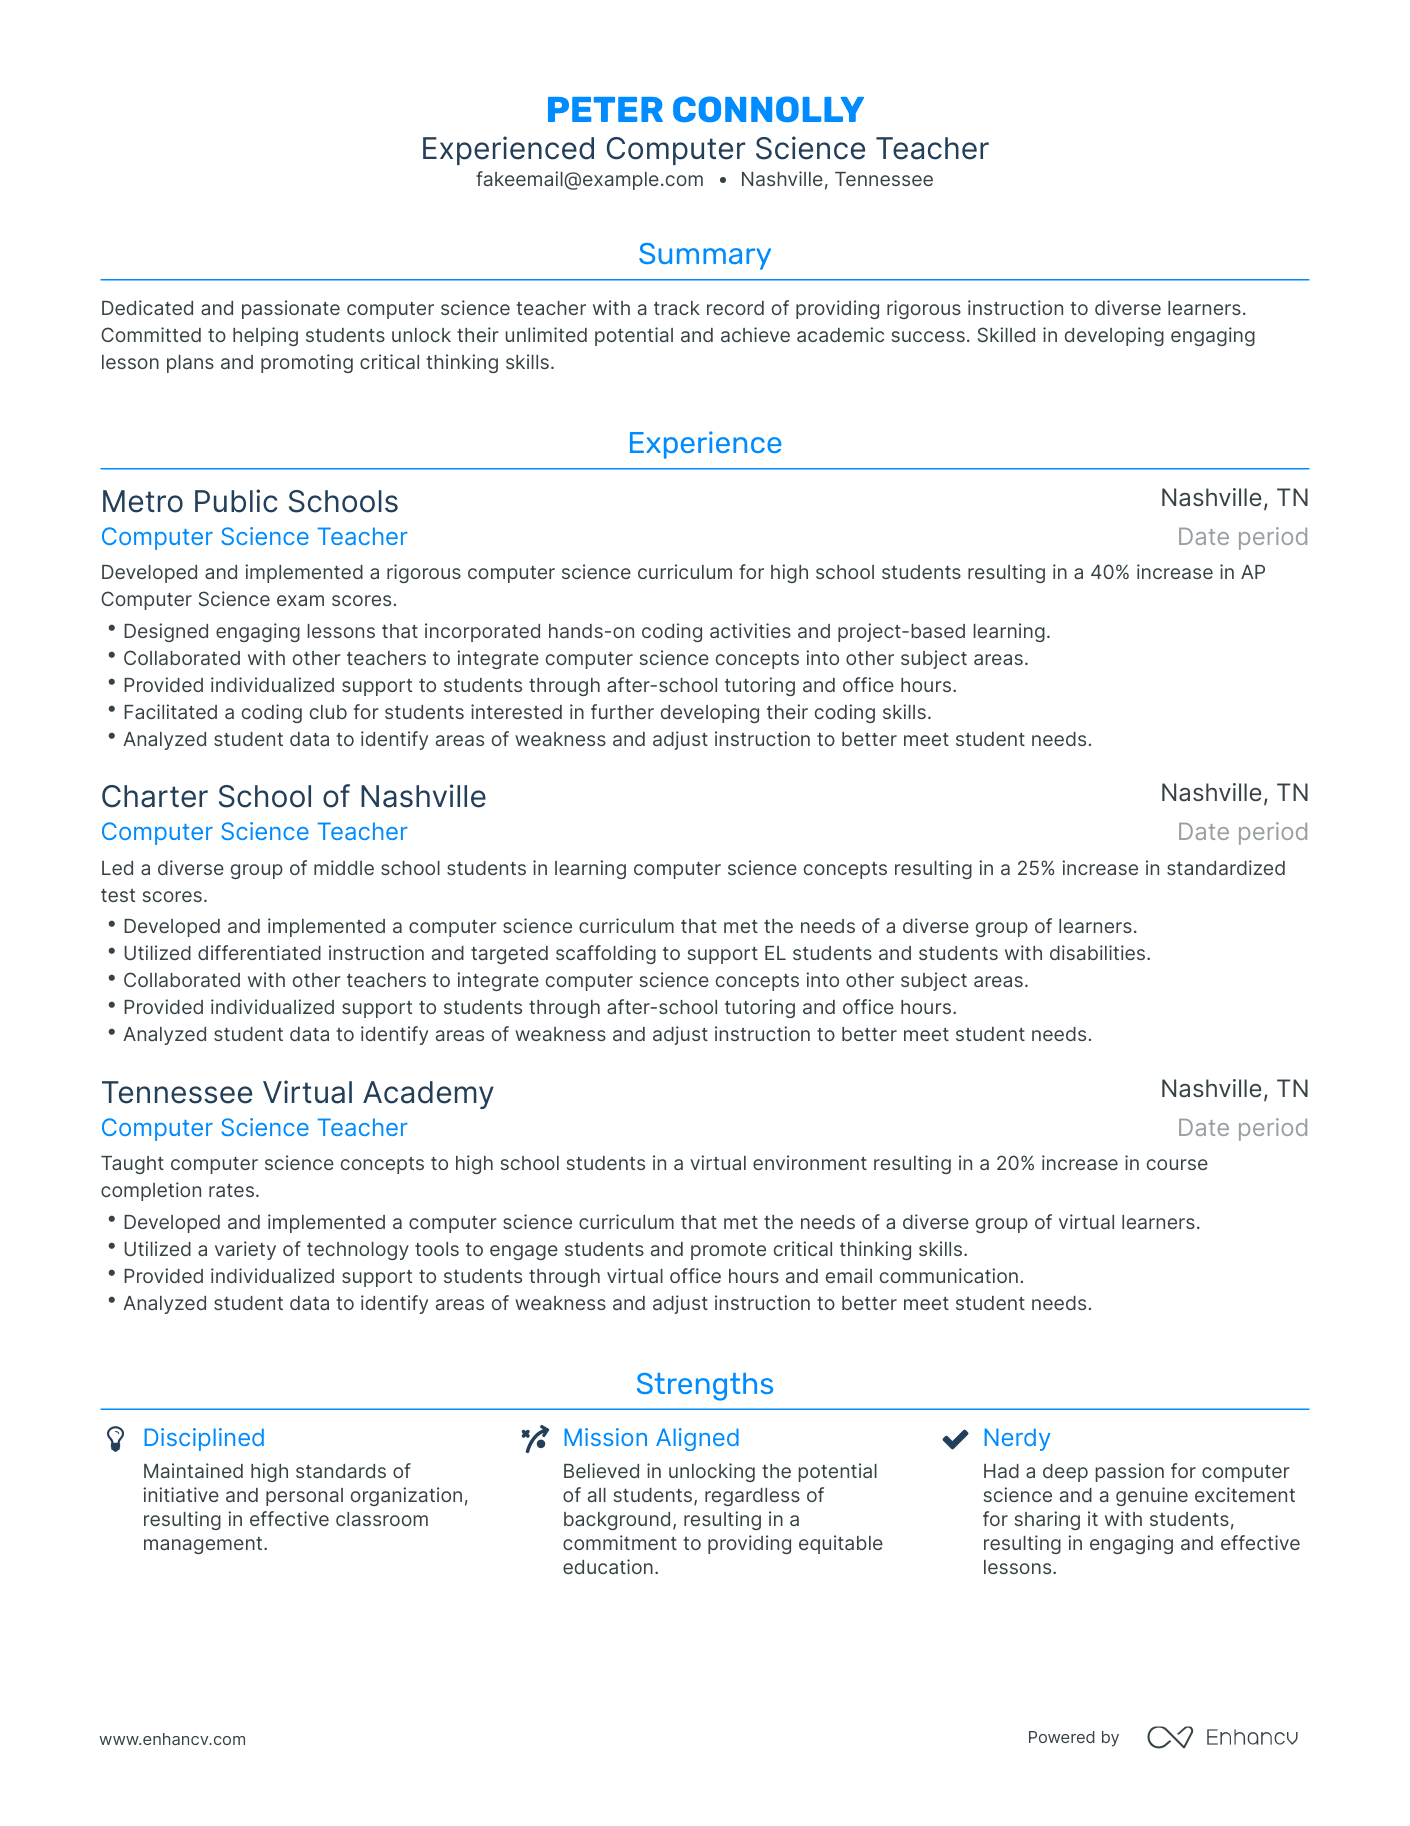 Traditional Computer Science Teacher Resume Template